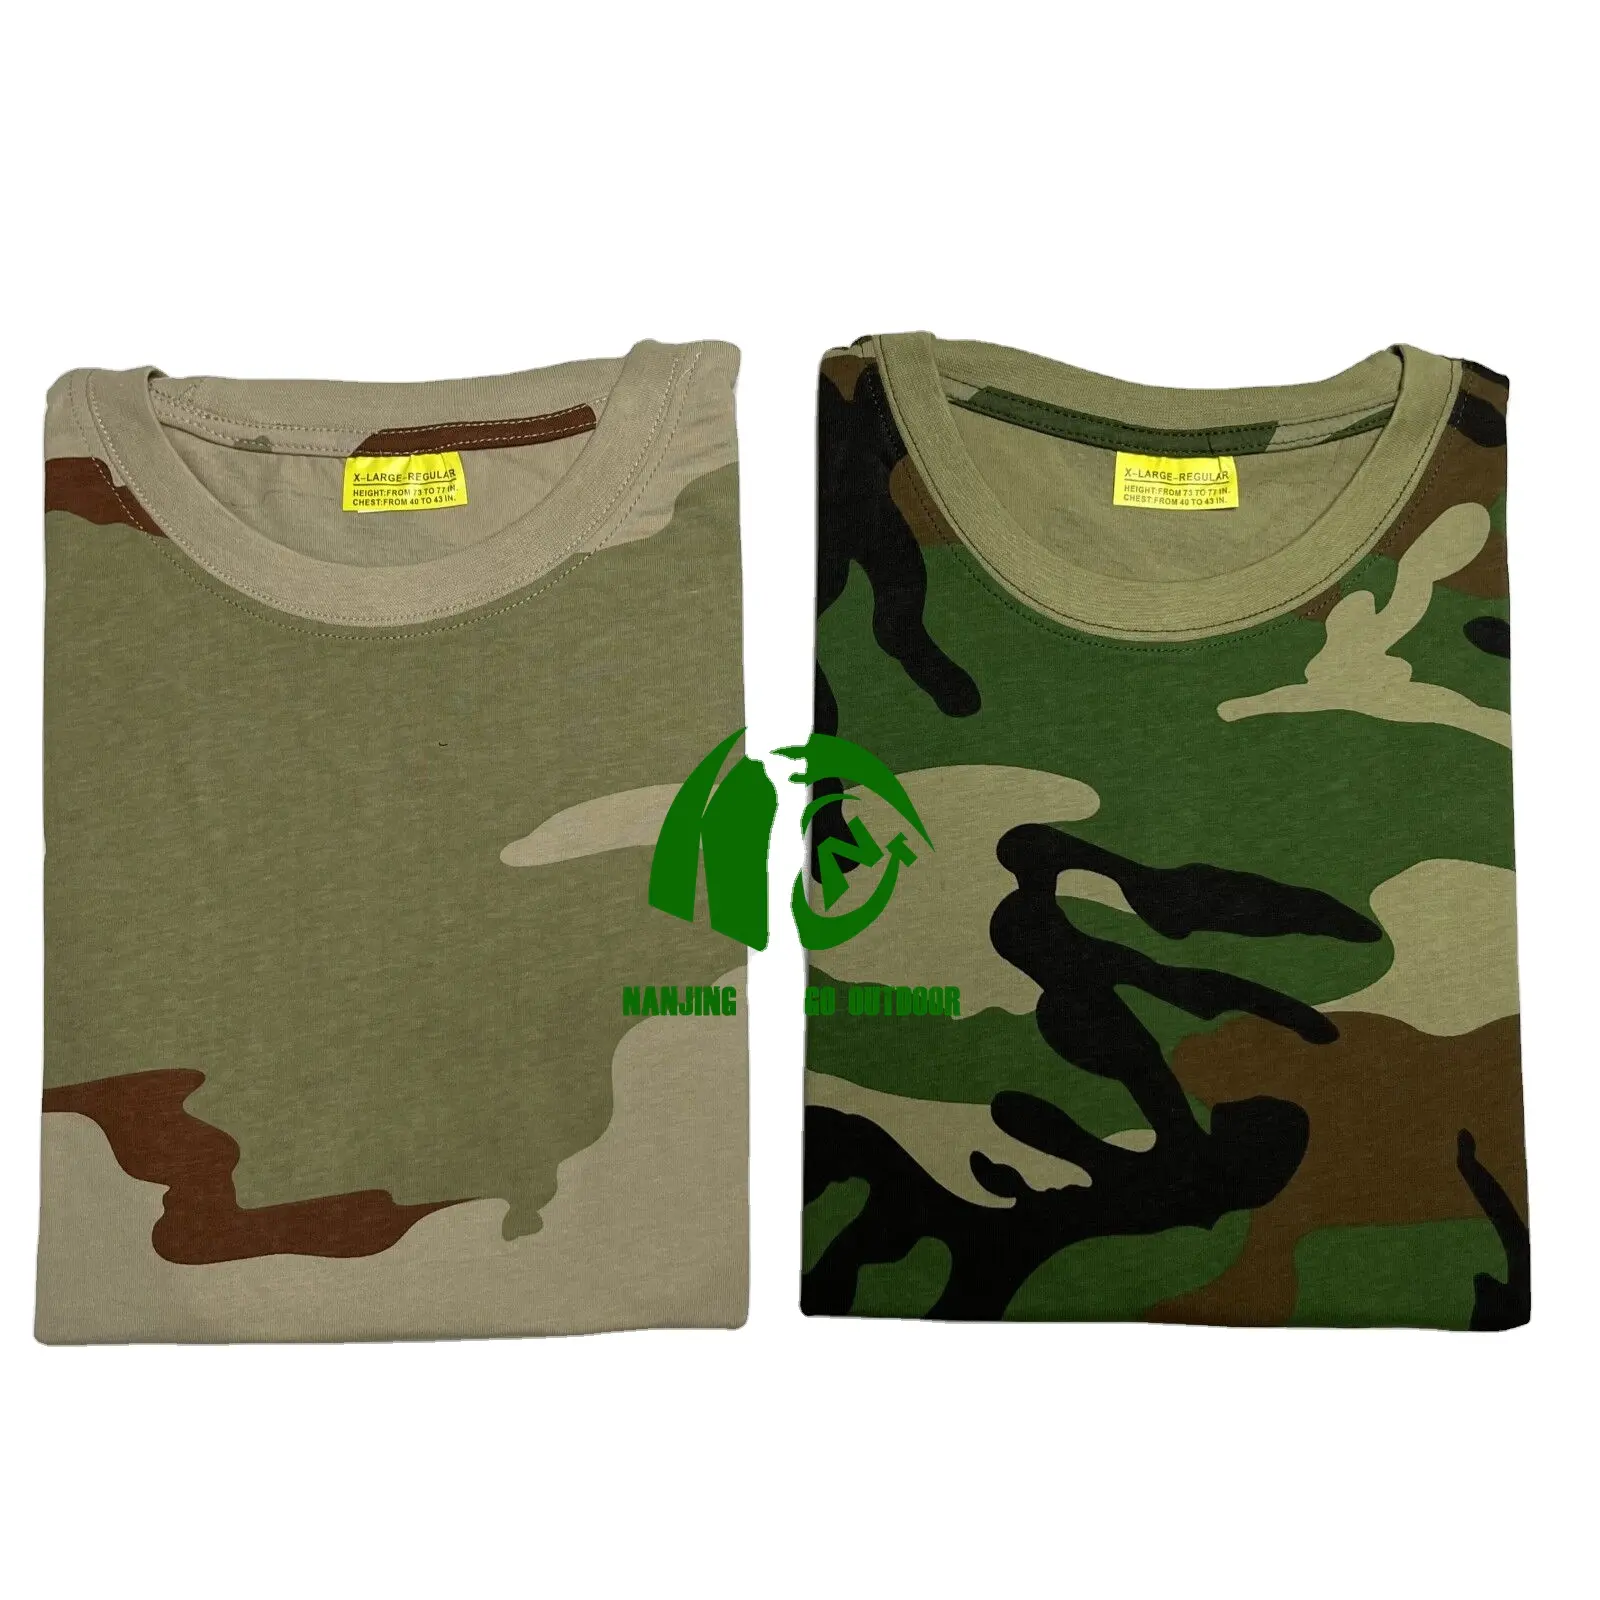 supreme - Fronts Tee Woodland Camo Large